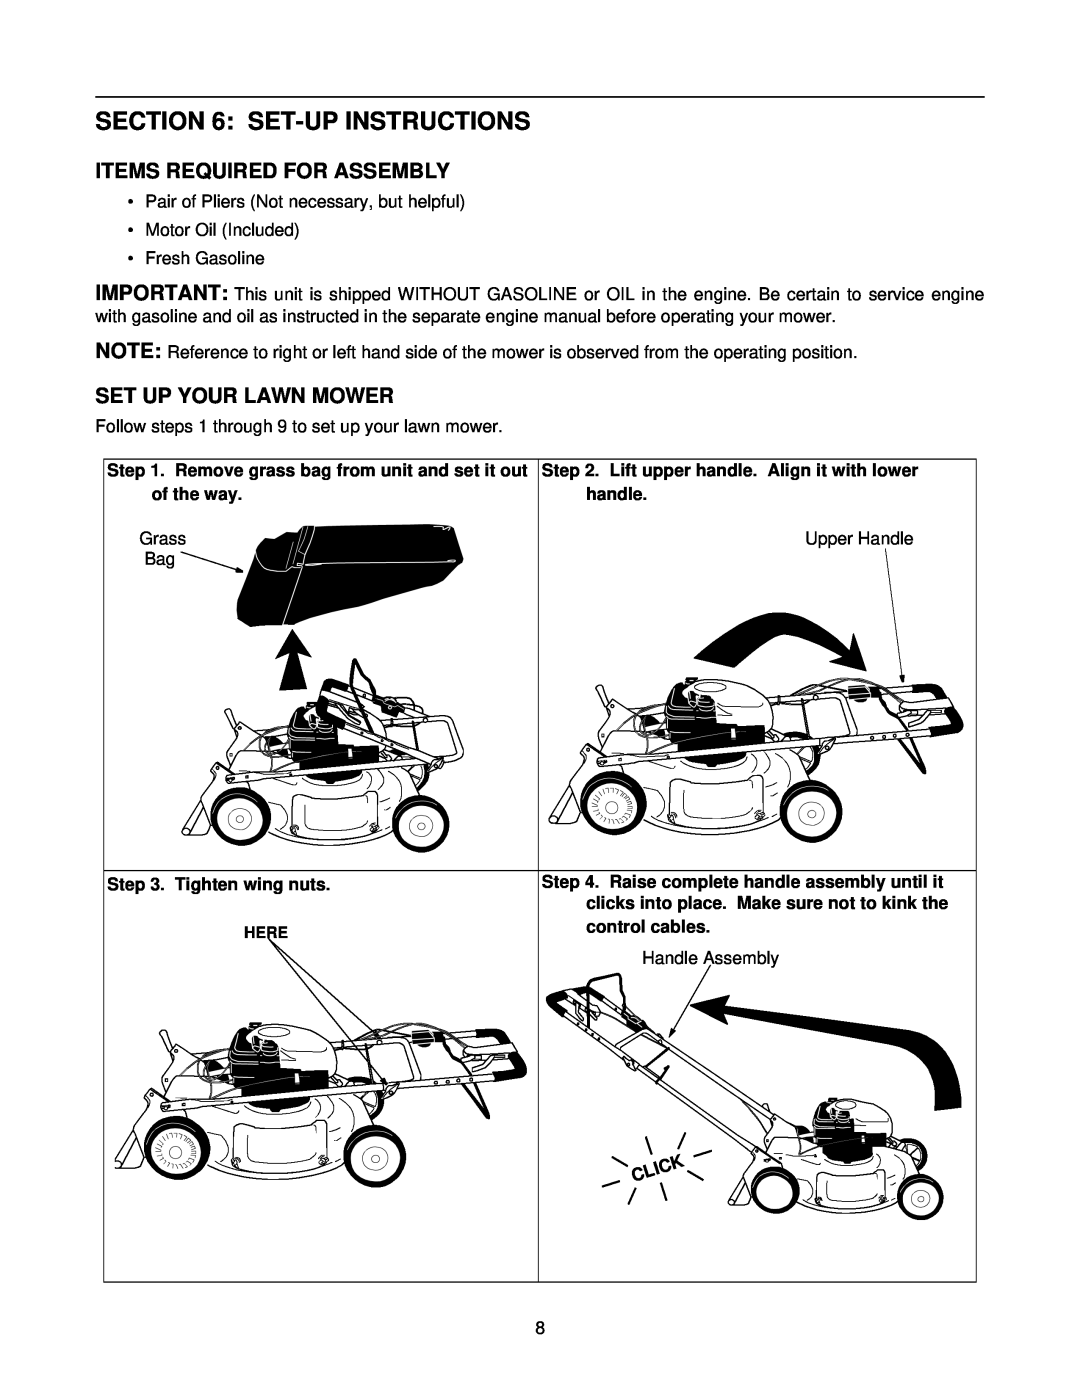 Yard-Man 247.37979 manual Set-Upinstructions, Items Required For Assembly, Set Up Your Lawn Mower 